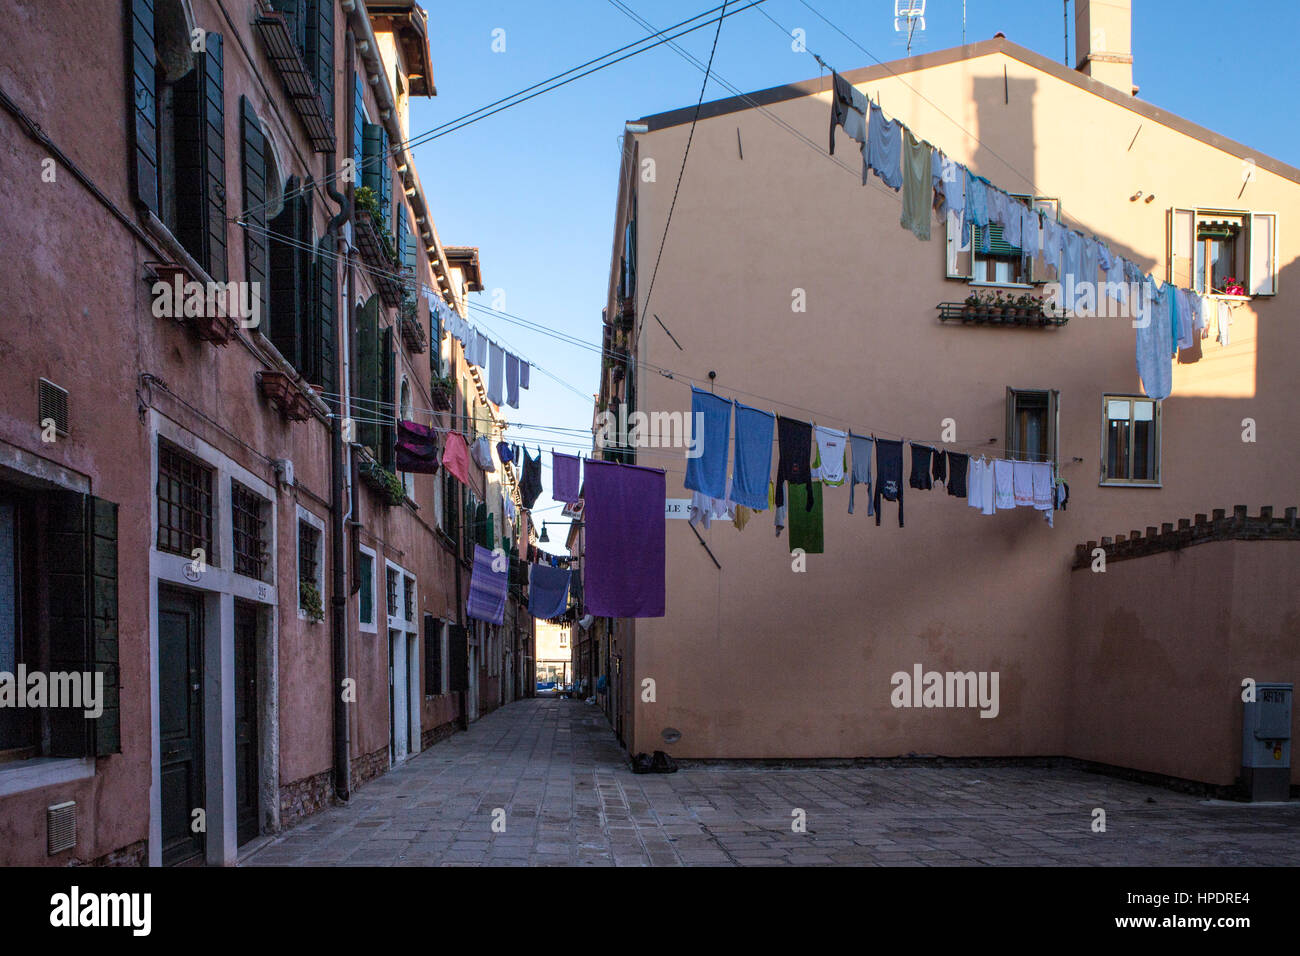 Laundry hanging to dry above a street in Venice Stock Photo